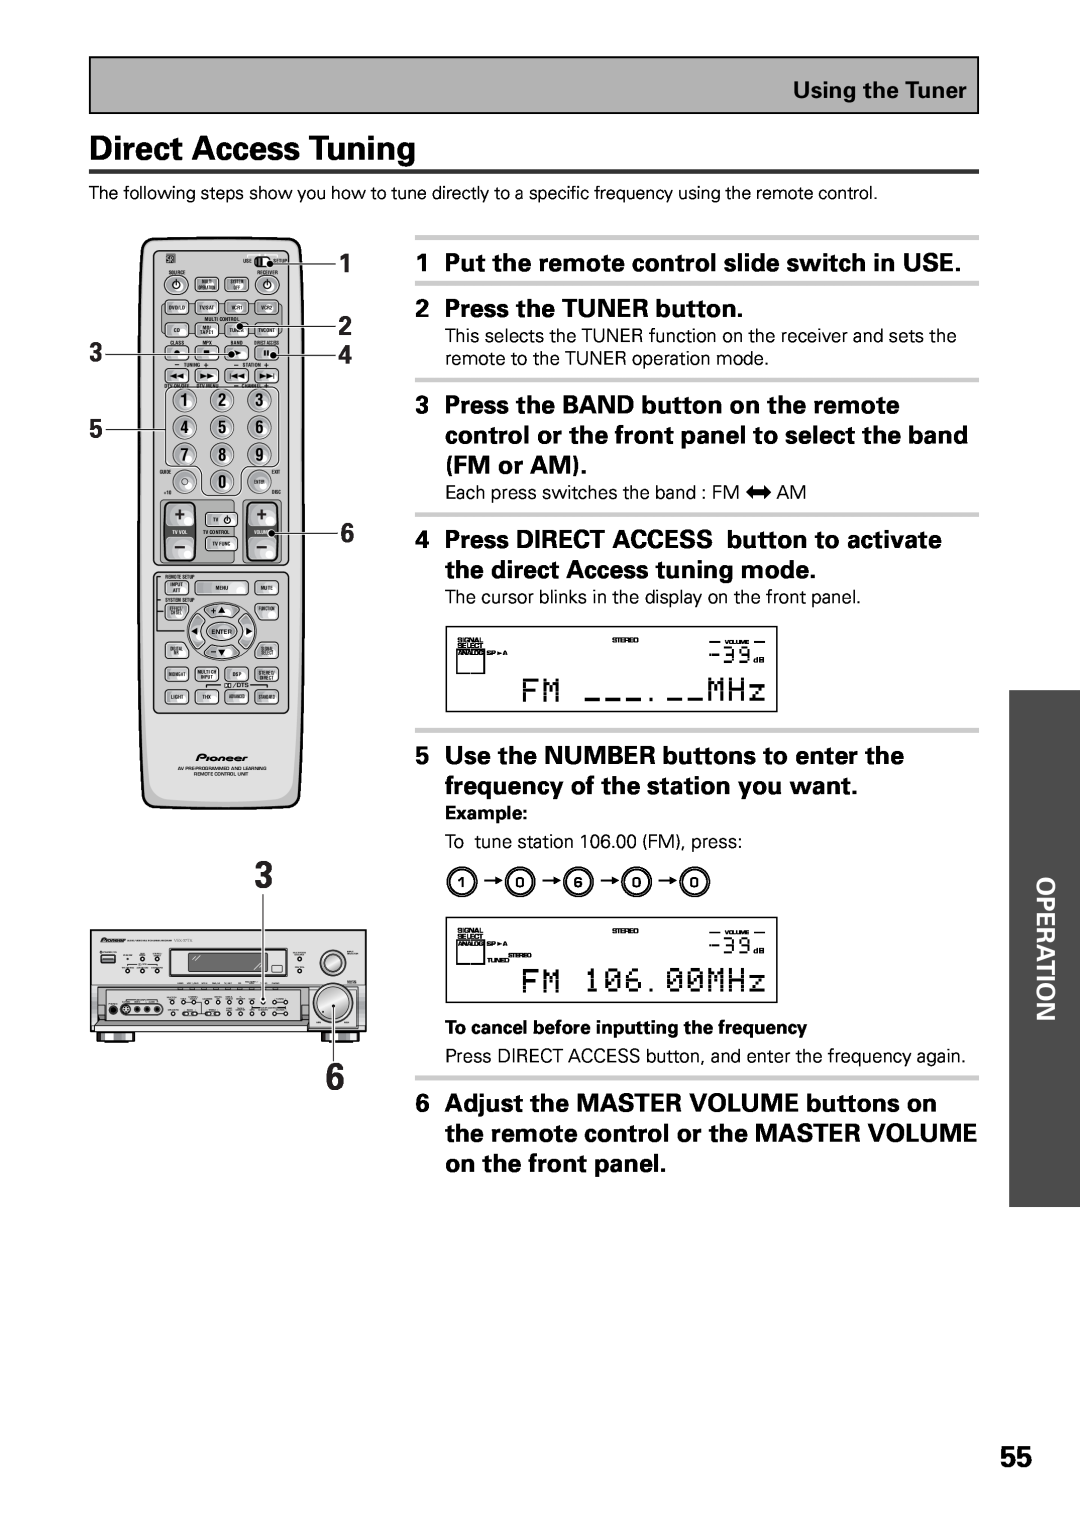 Pioneer VSX-37TX, VSX-36TX Direct Access Tuning, 1 2 4 6, FM or AM, 1Put the remote control slide switch in USE, Operation 